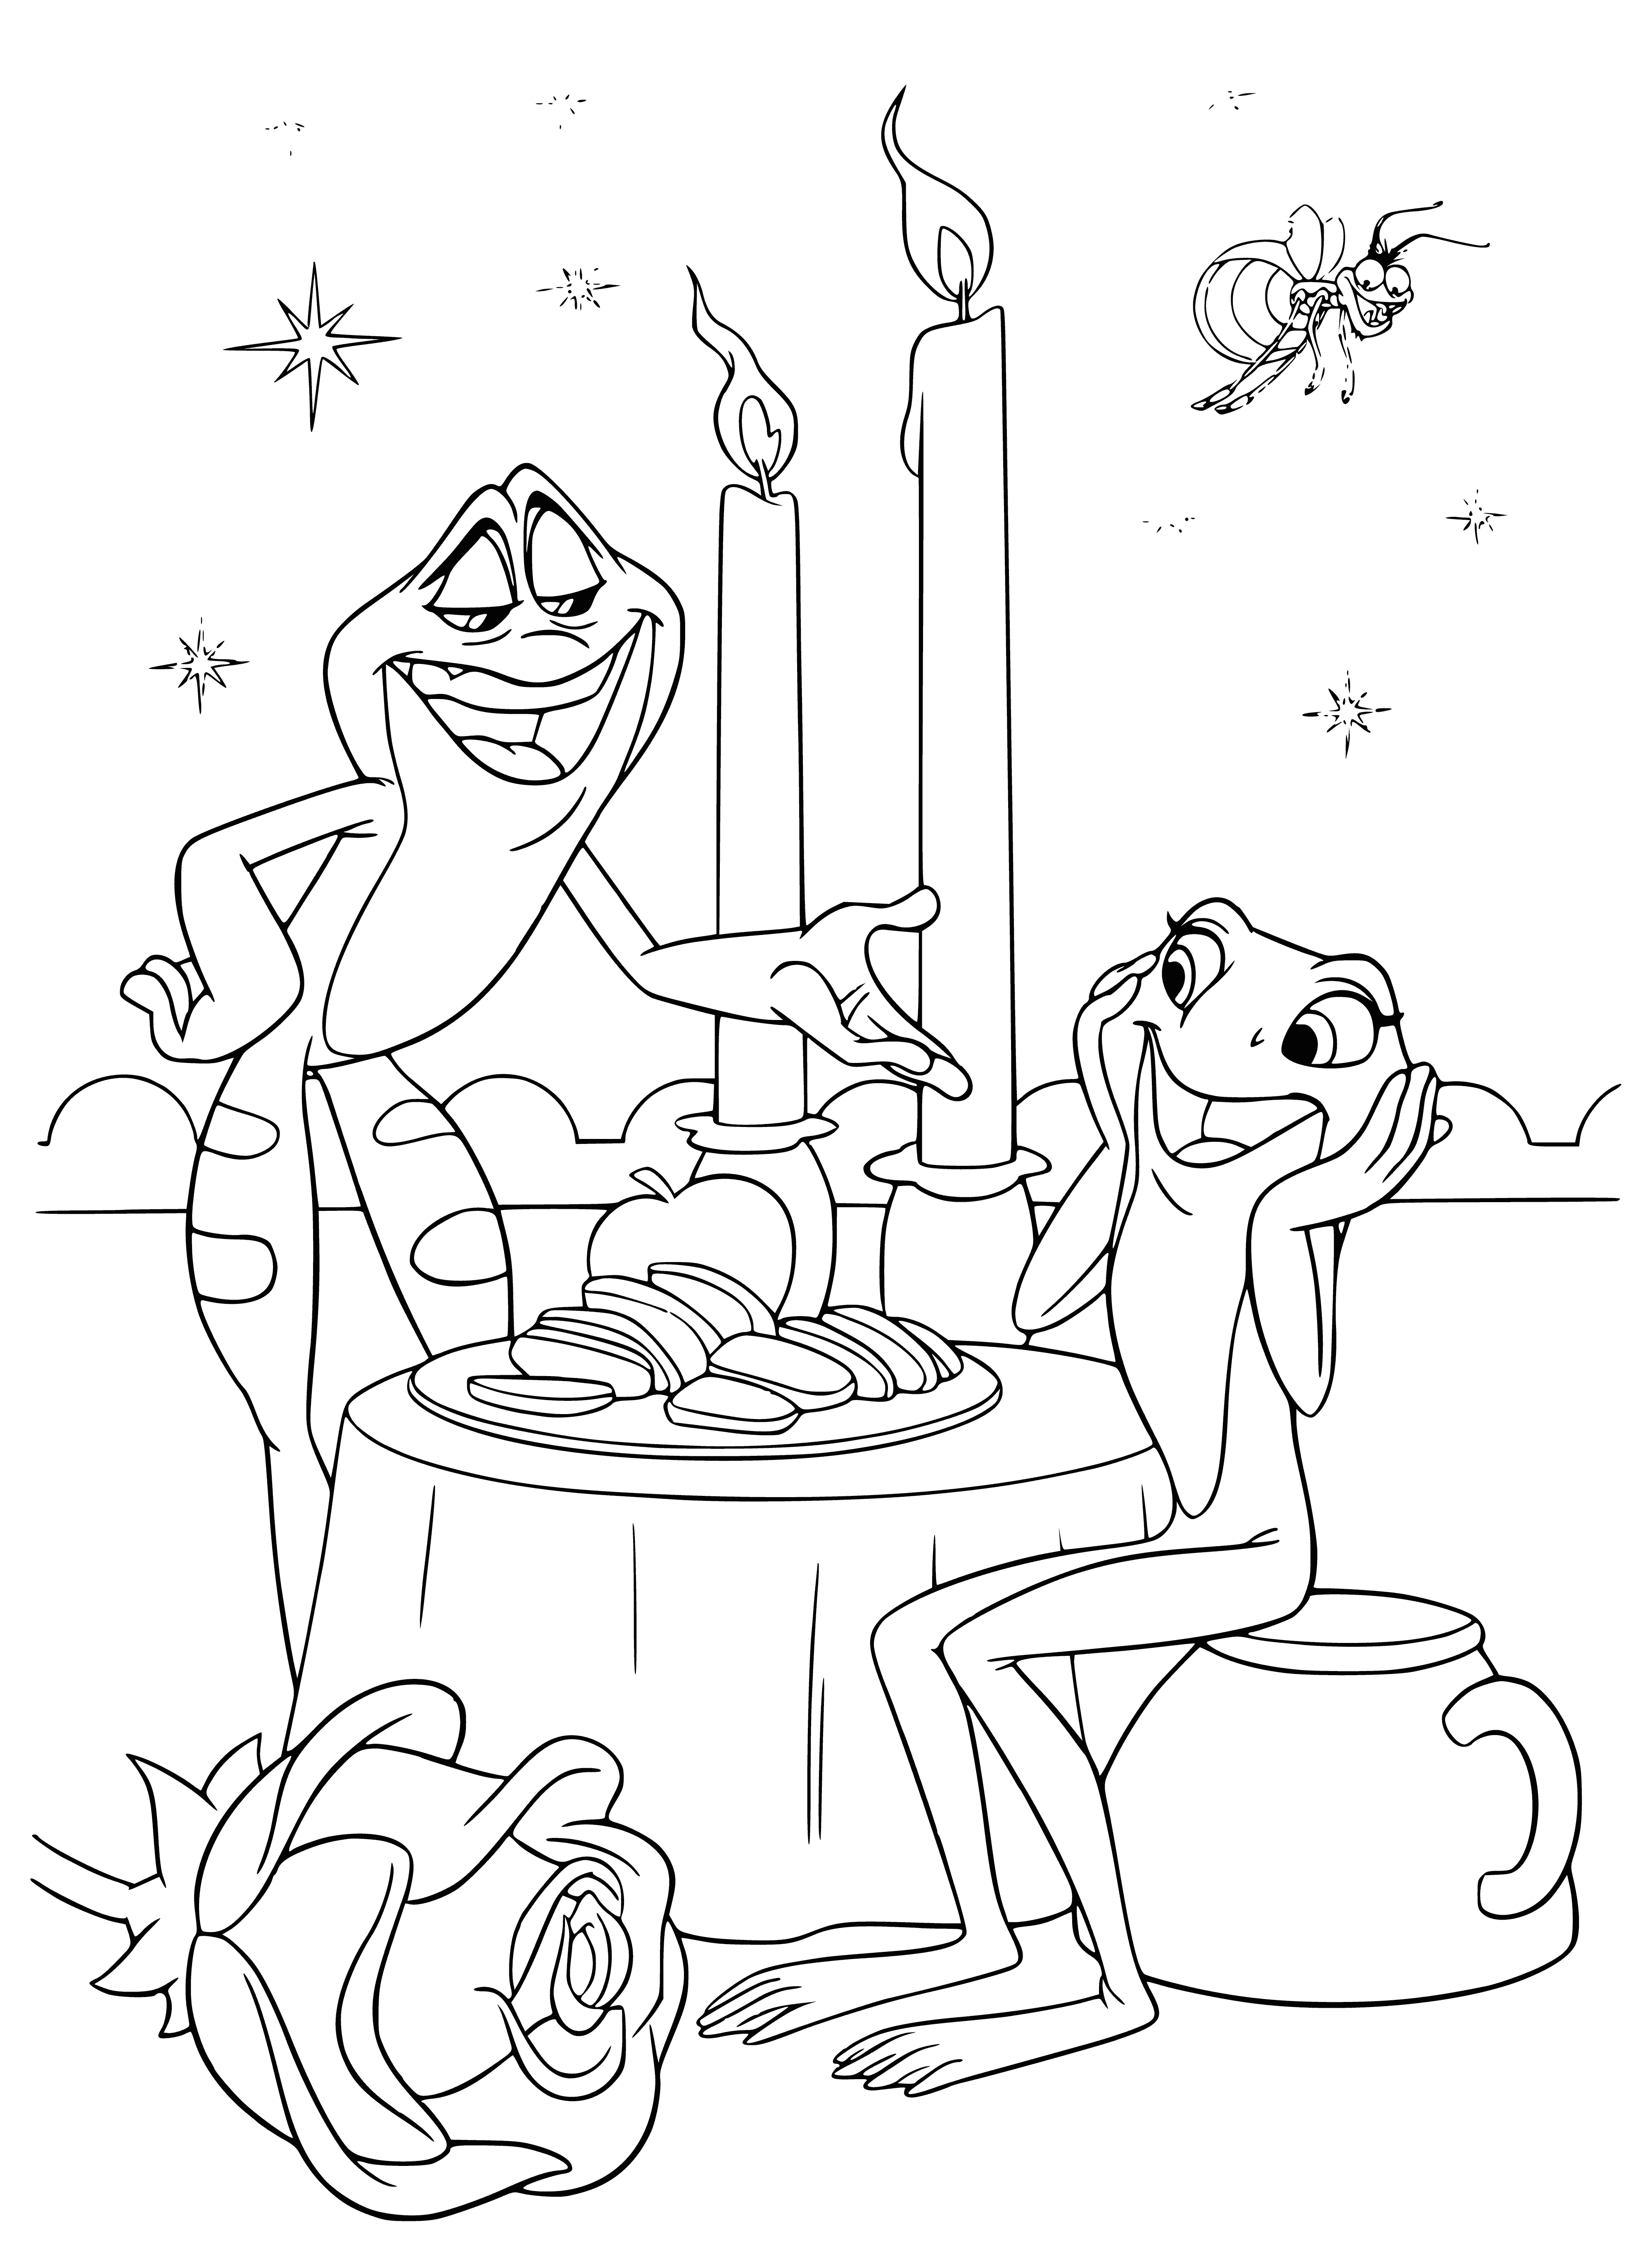 coloring page: A romantic evening: Frog Prince and Princess standing on a lily pad, in love, against a beautiful sky.